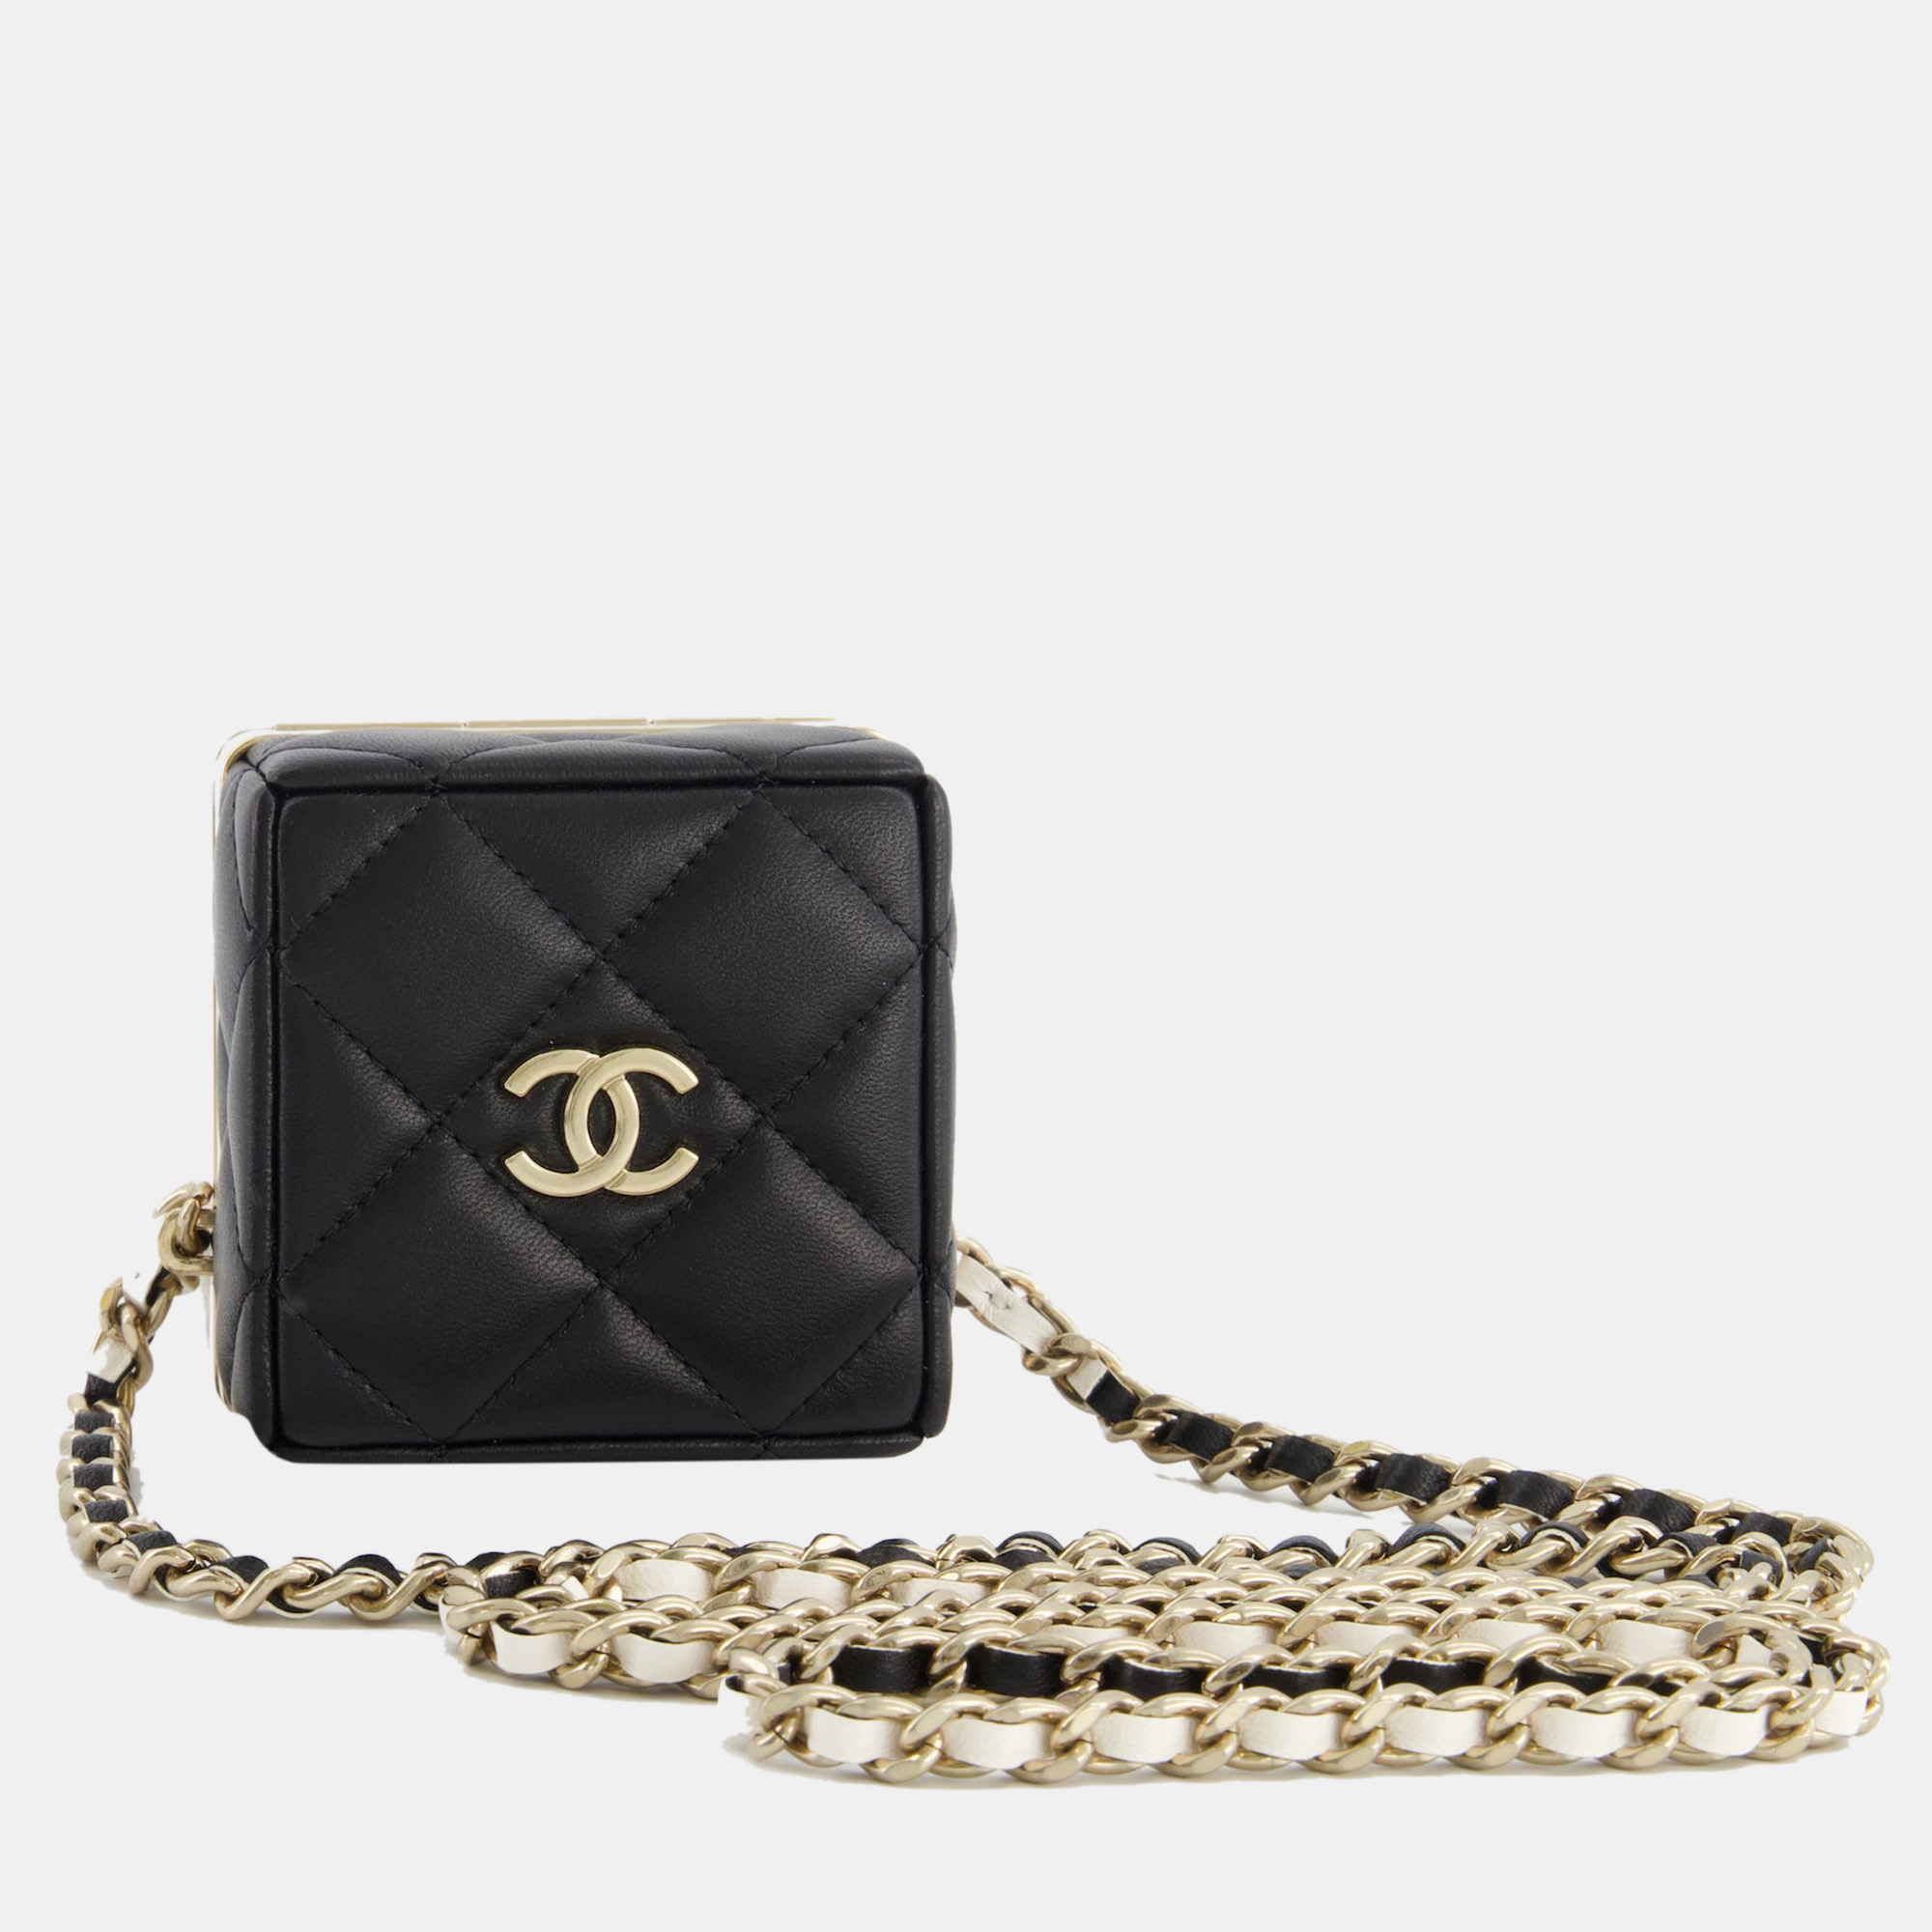 Chanel black and white micro box square bag with gold hardware